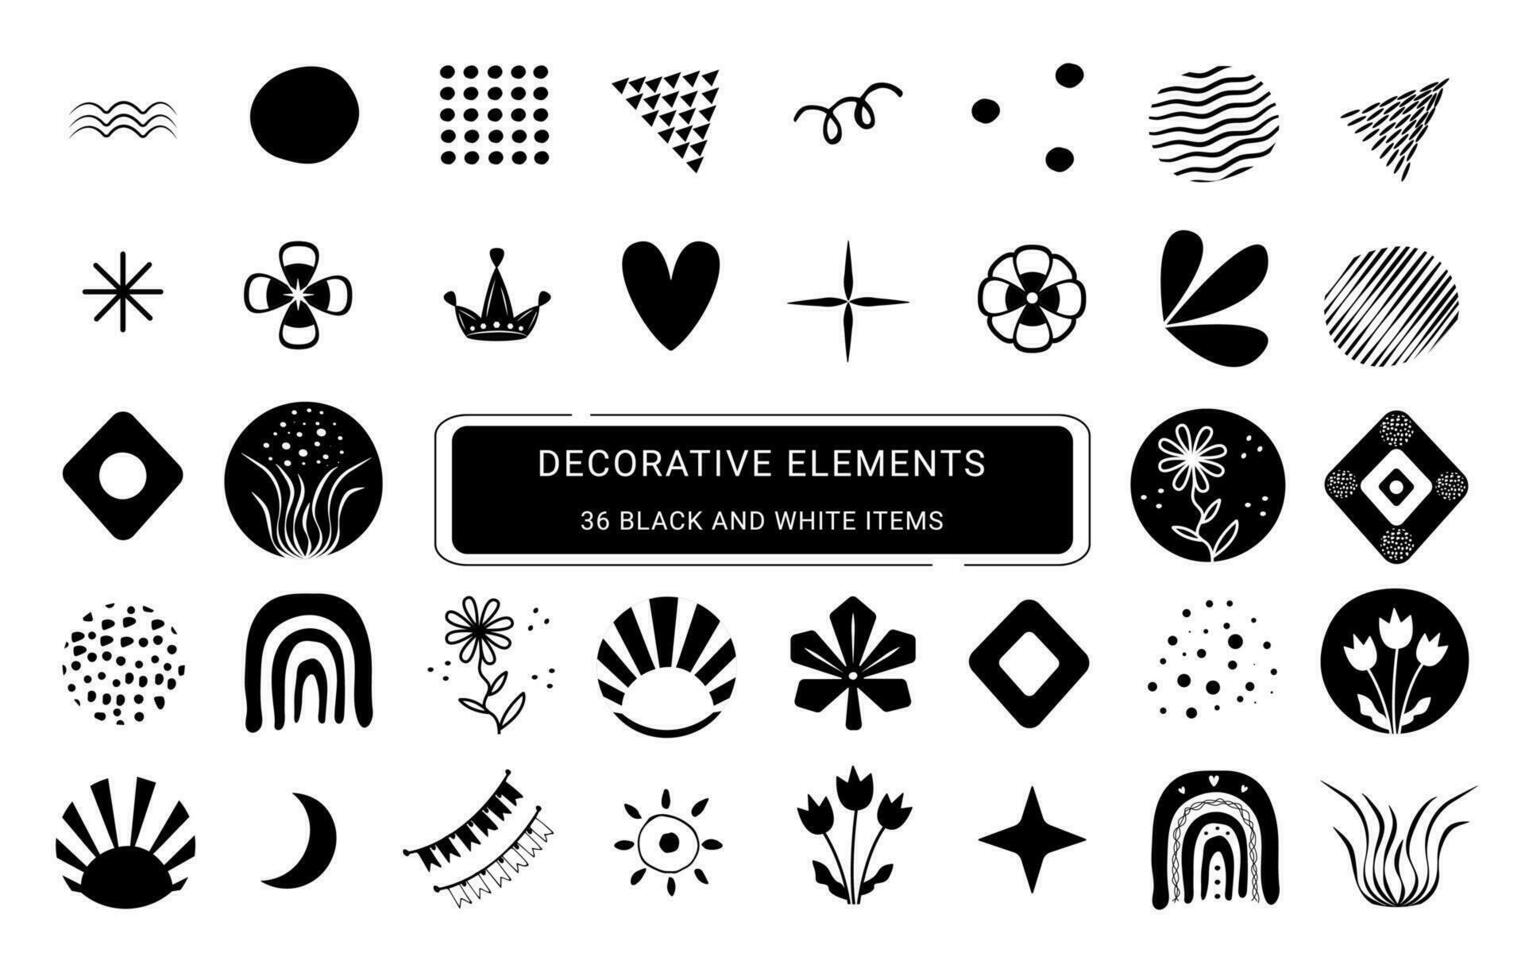 Decorative elements icon set, black and white items vector